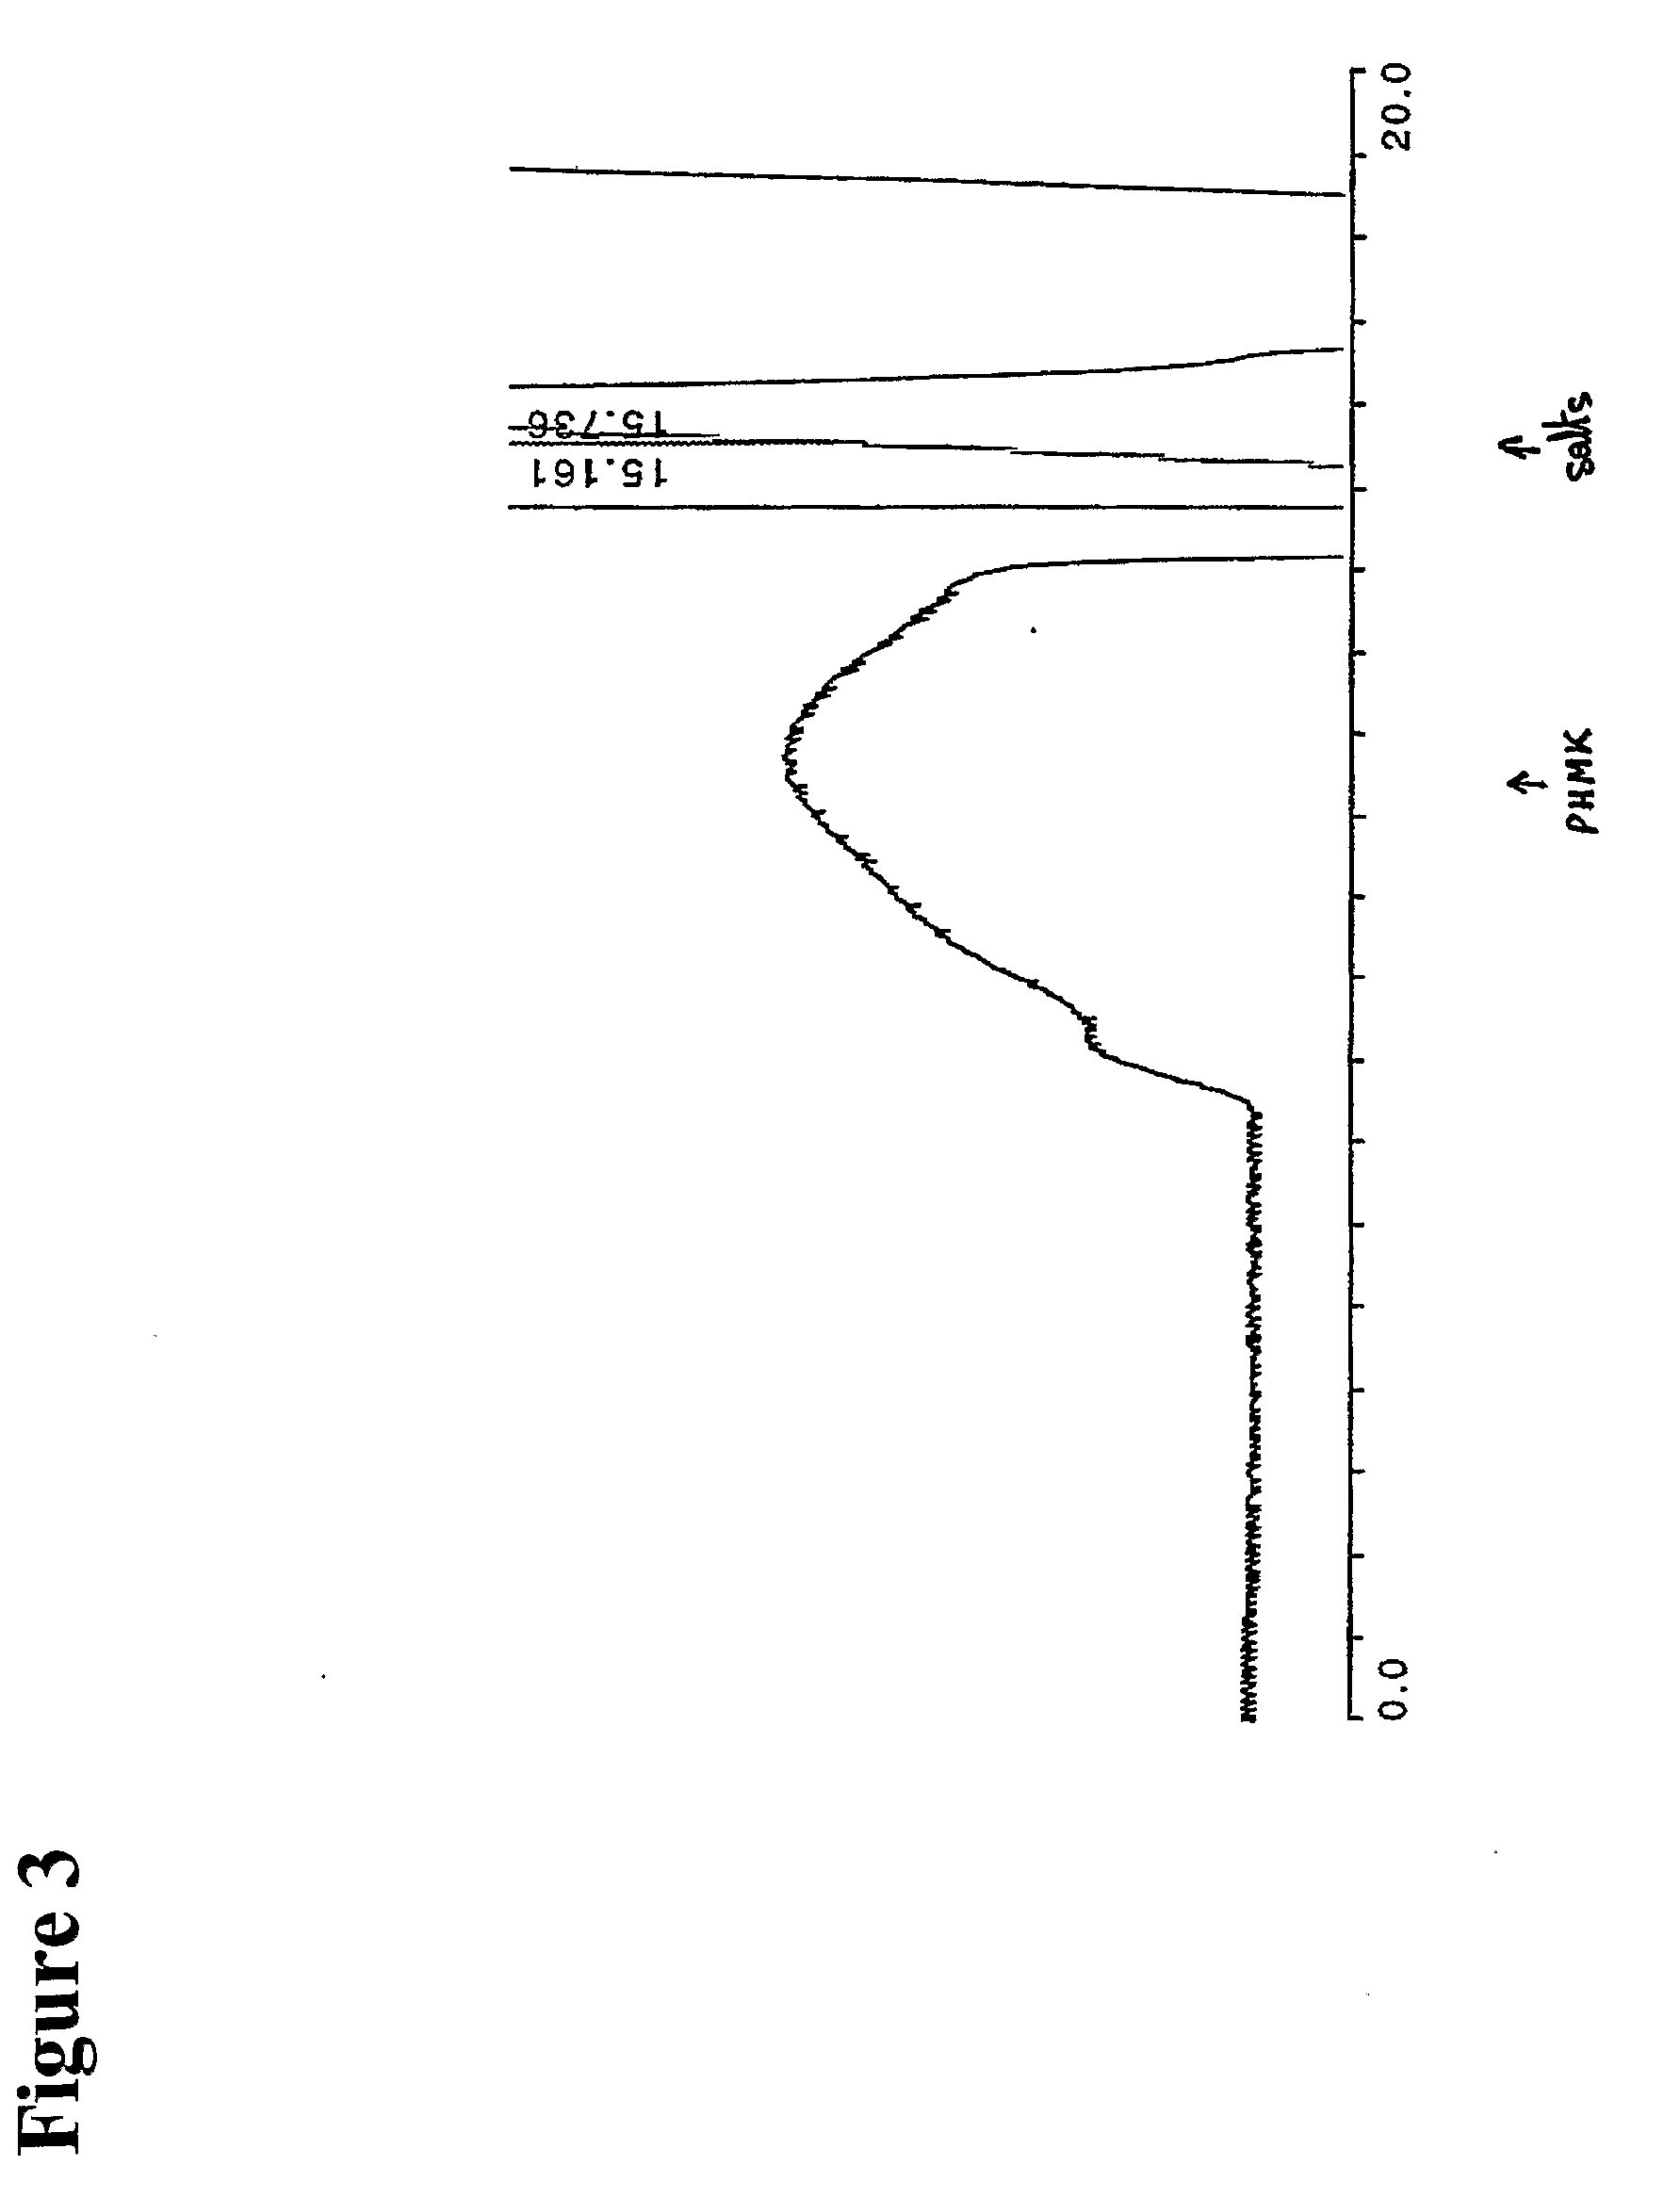 Biodegradable polyketal polymers and methods for their formation and use